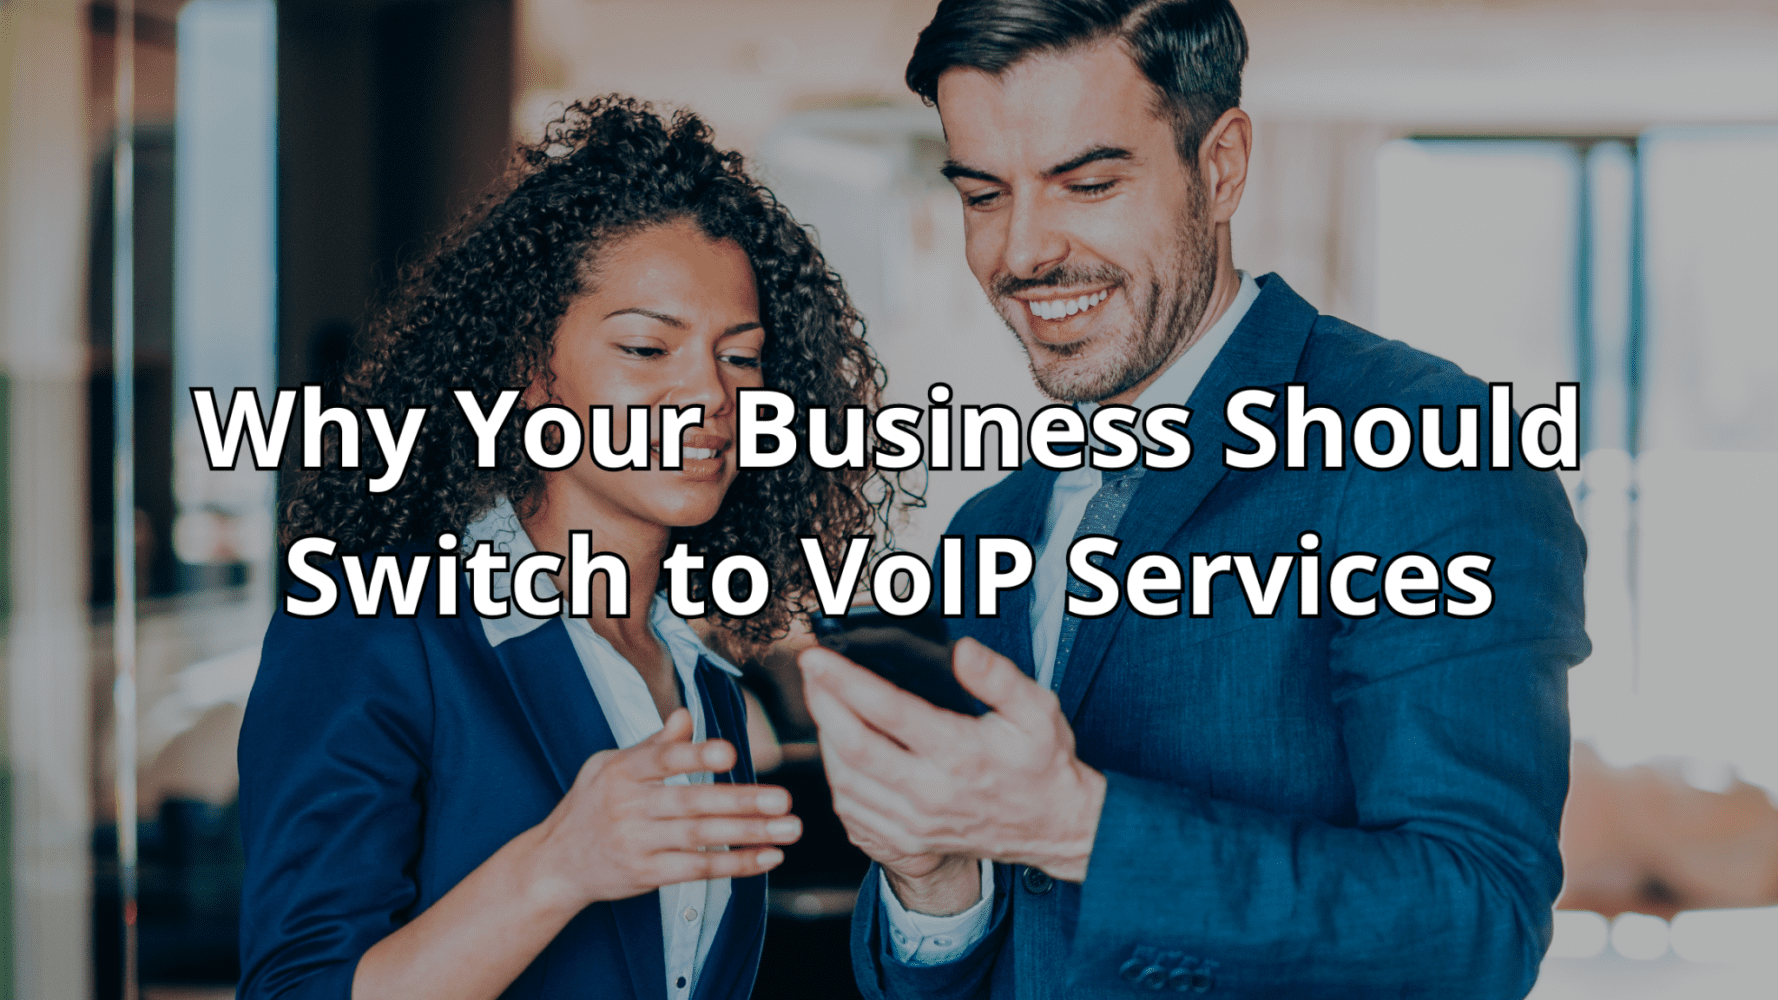 Streamlining Your Communication: How VoIP Services Can Help Your Business Succeed